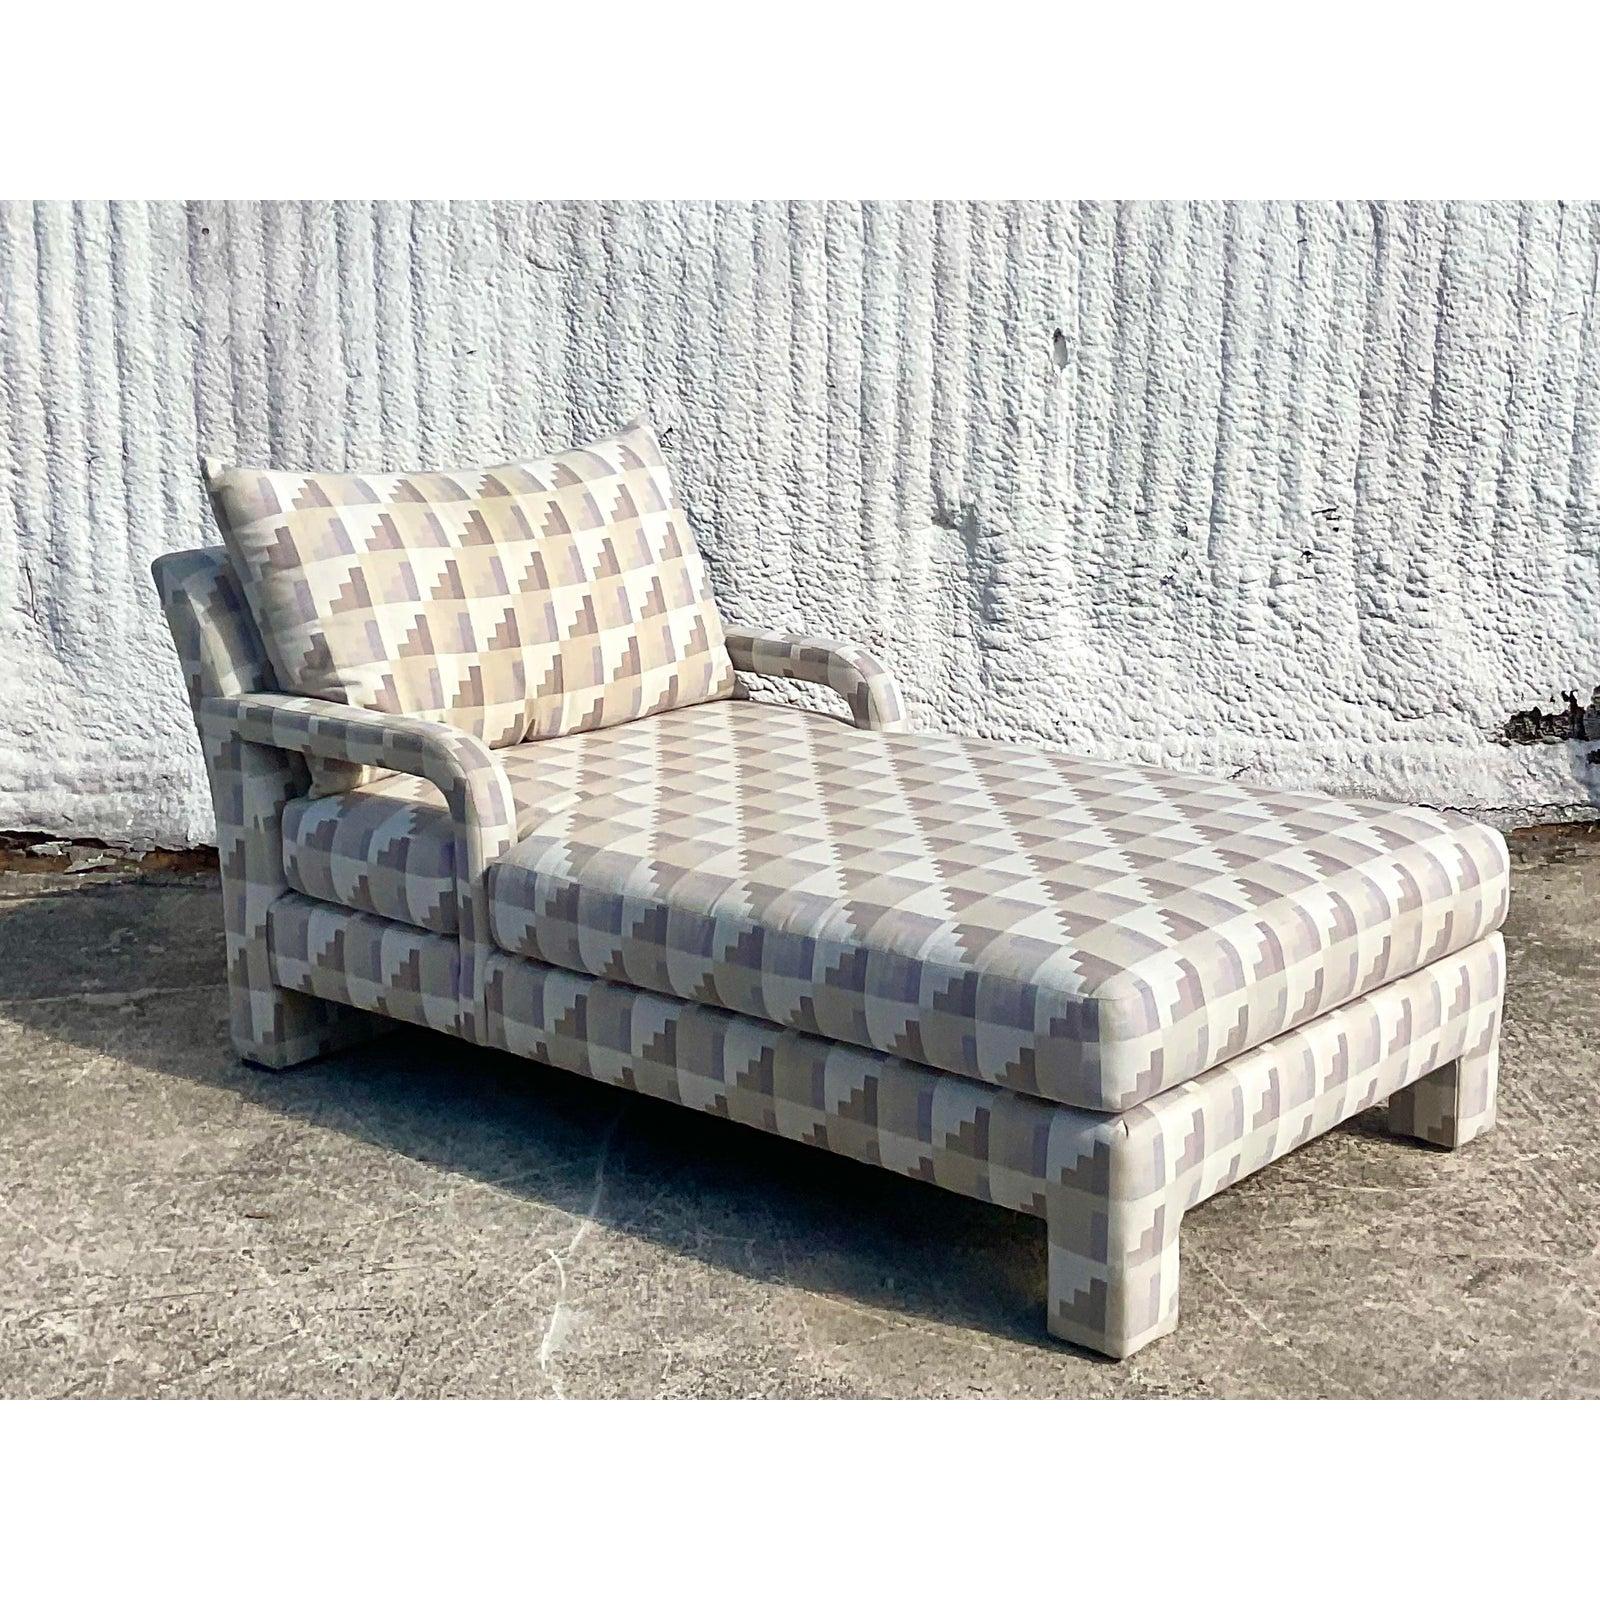 Fantastic vintage John Mascheroni chaise lounge. Done for the iconic Swaim group. Beautiful wide seats which chic open arms. Just the most beautiful shape. Acquired from a Palm Beach estate.